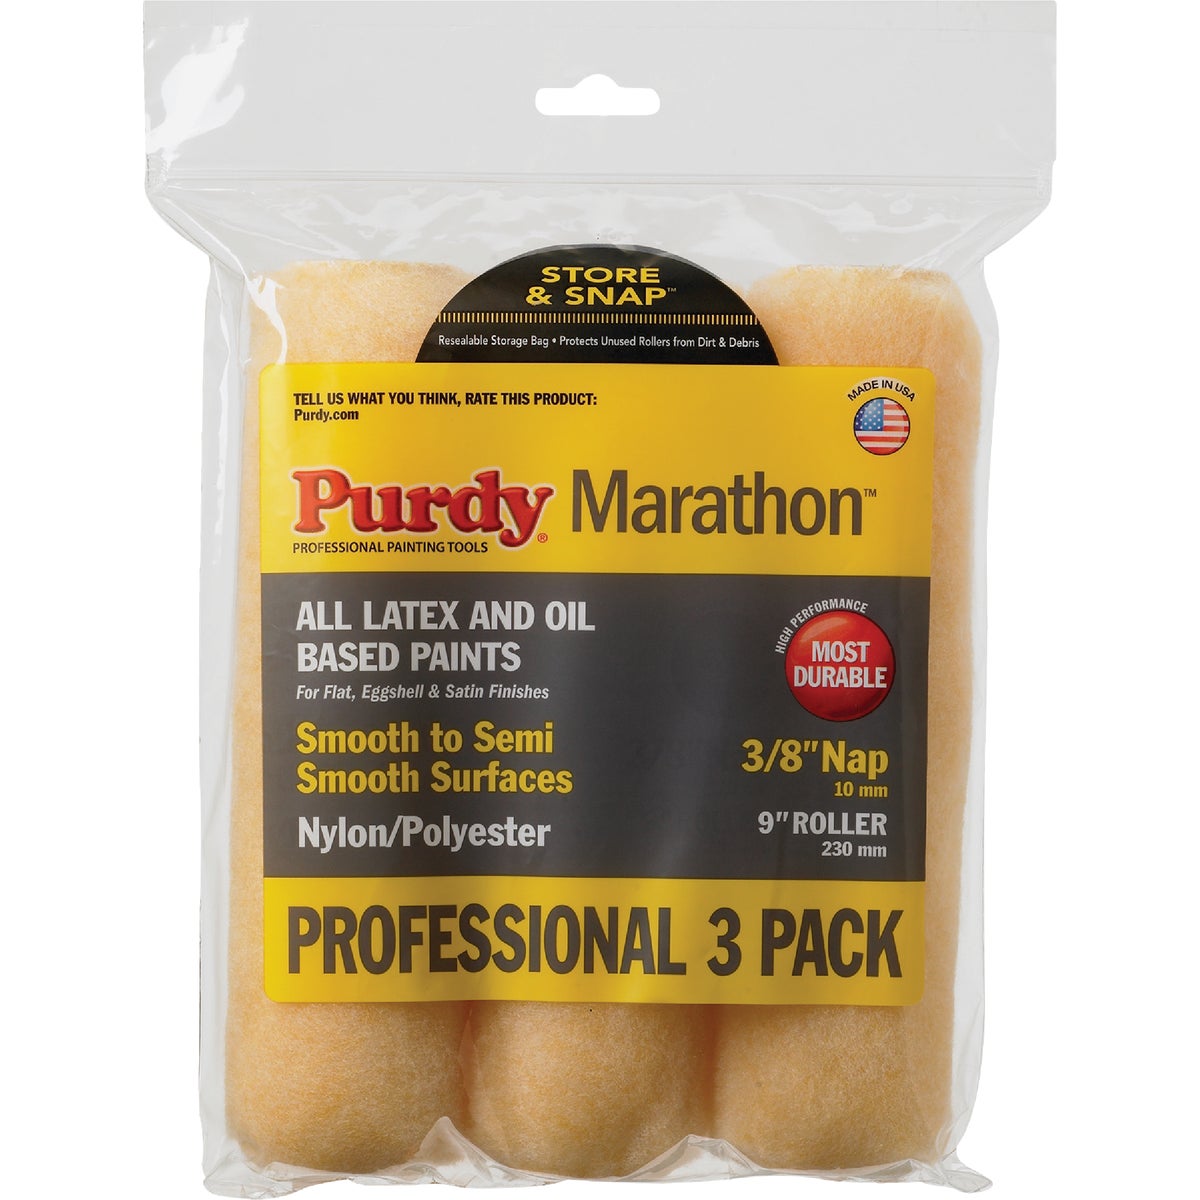 Purdy Marathon 9 In. x 3/8 In. Knit Fabric Roller Cover (3-Pack)